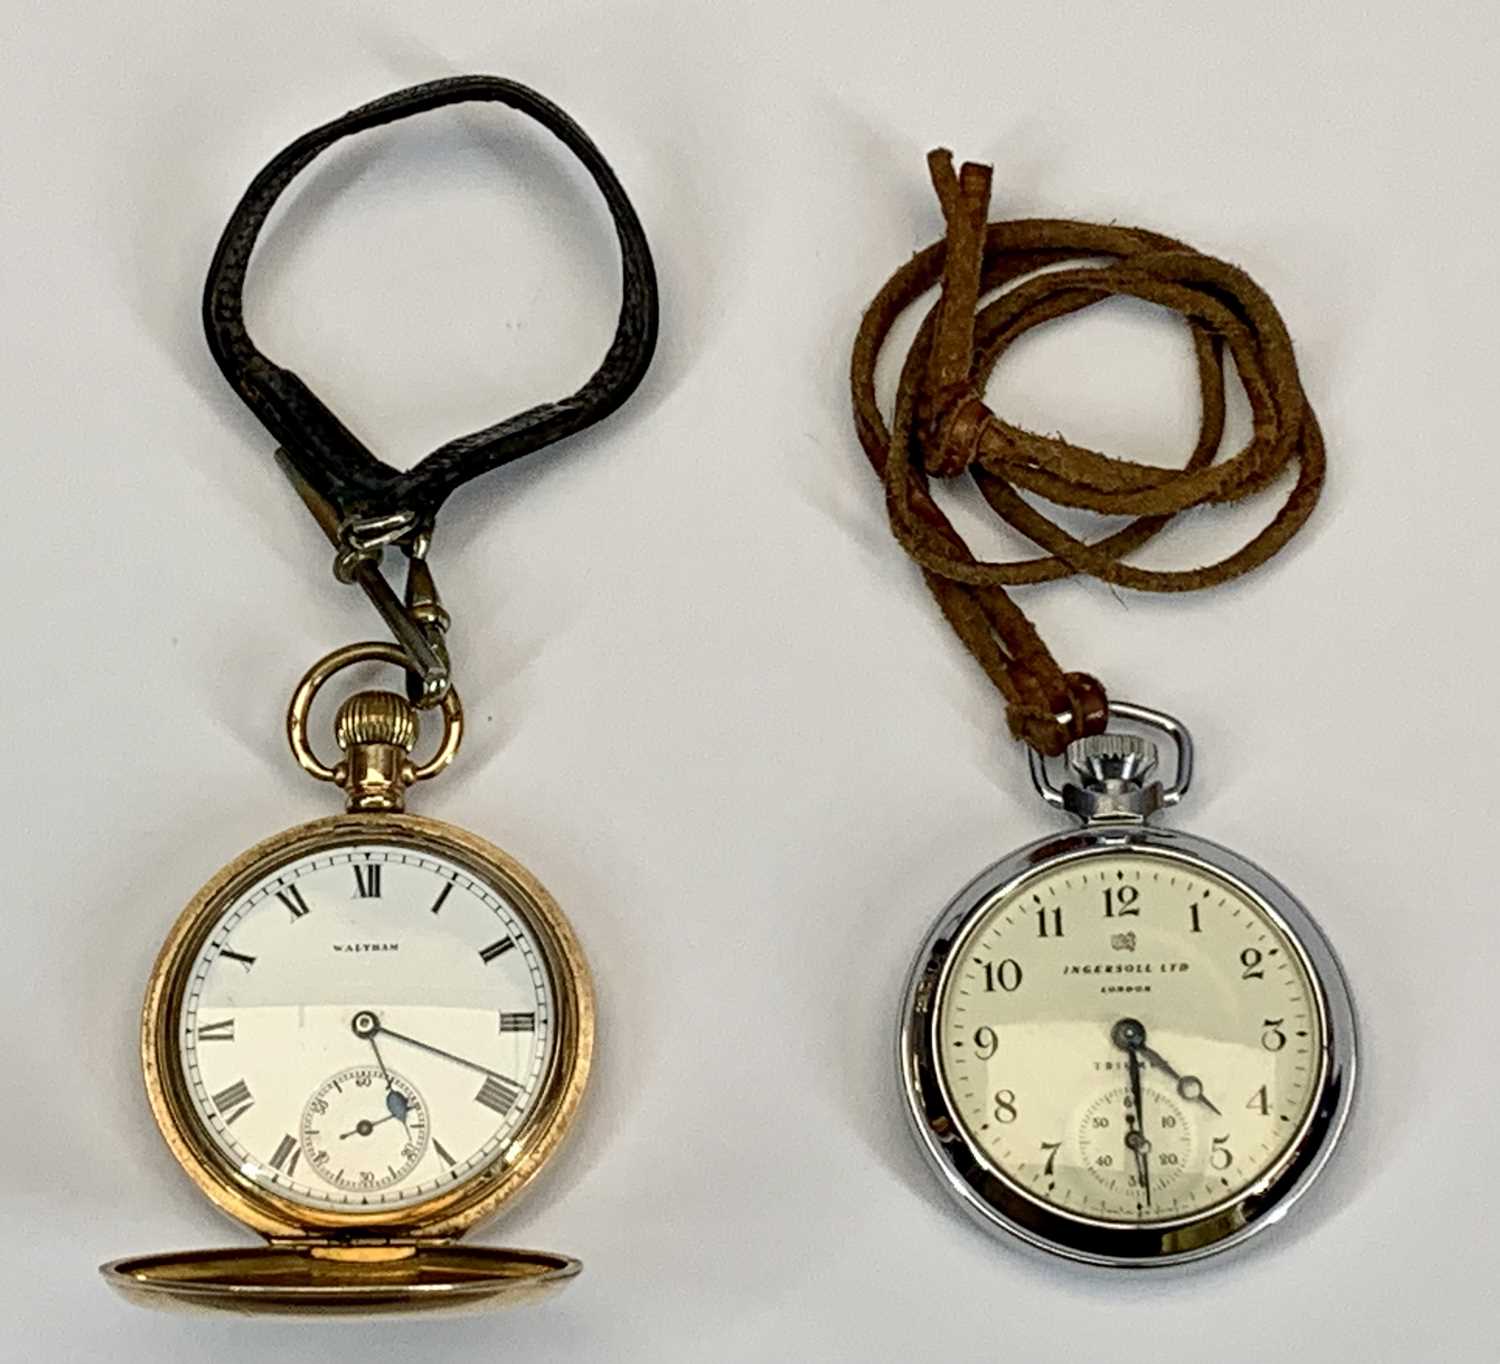 WALTHAM GOLD PLATED FULL HUNTER POCKET WATCH - top wind, white enamel dial with black Roman numerals